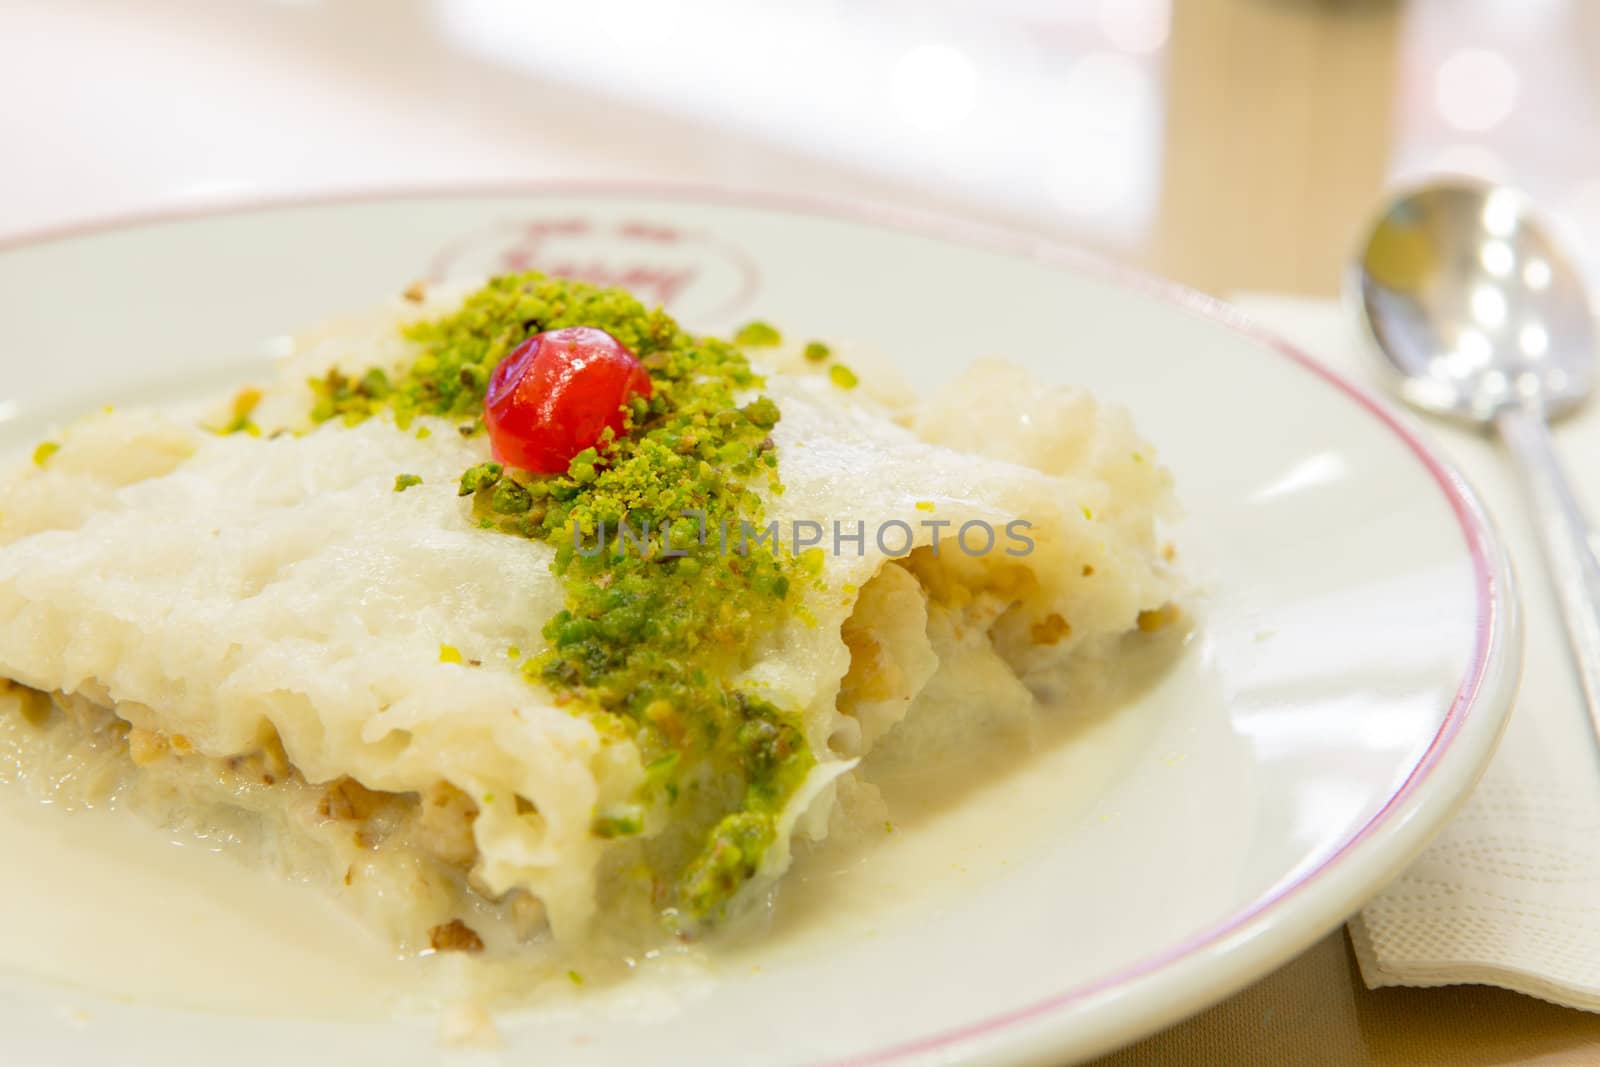 Traditional Turkish Ramadan dessert Gullac made with Phyllo Dough and sweetened milk, served with pistachio crumble and complimented with a piece of cherry.